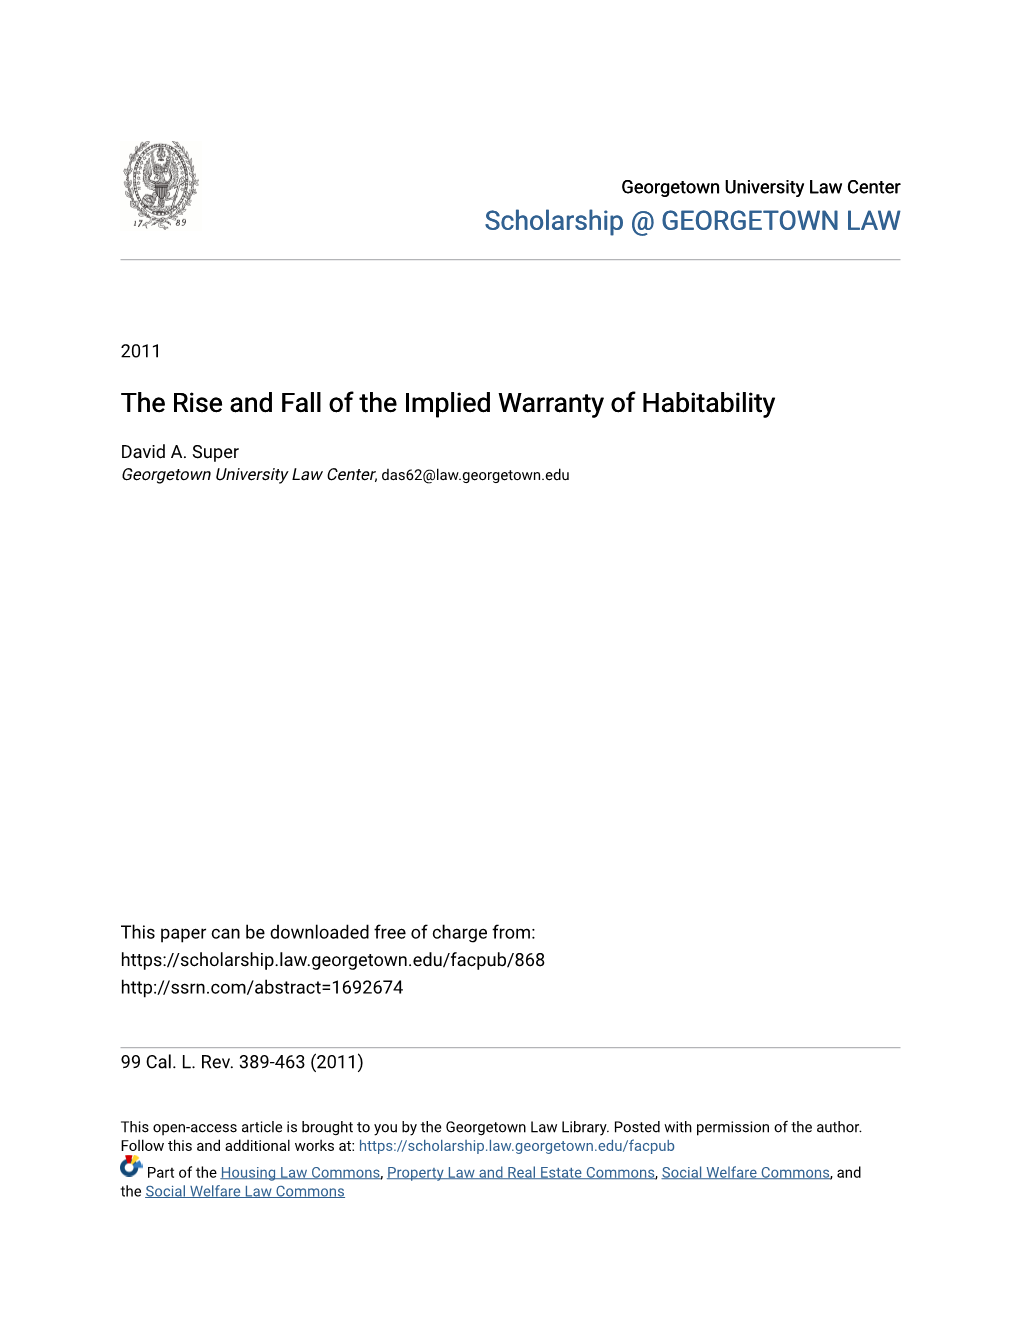 The Rise and Fall of the Implied Warranty of Habitability